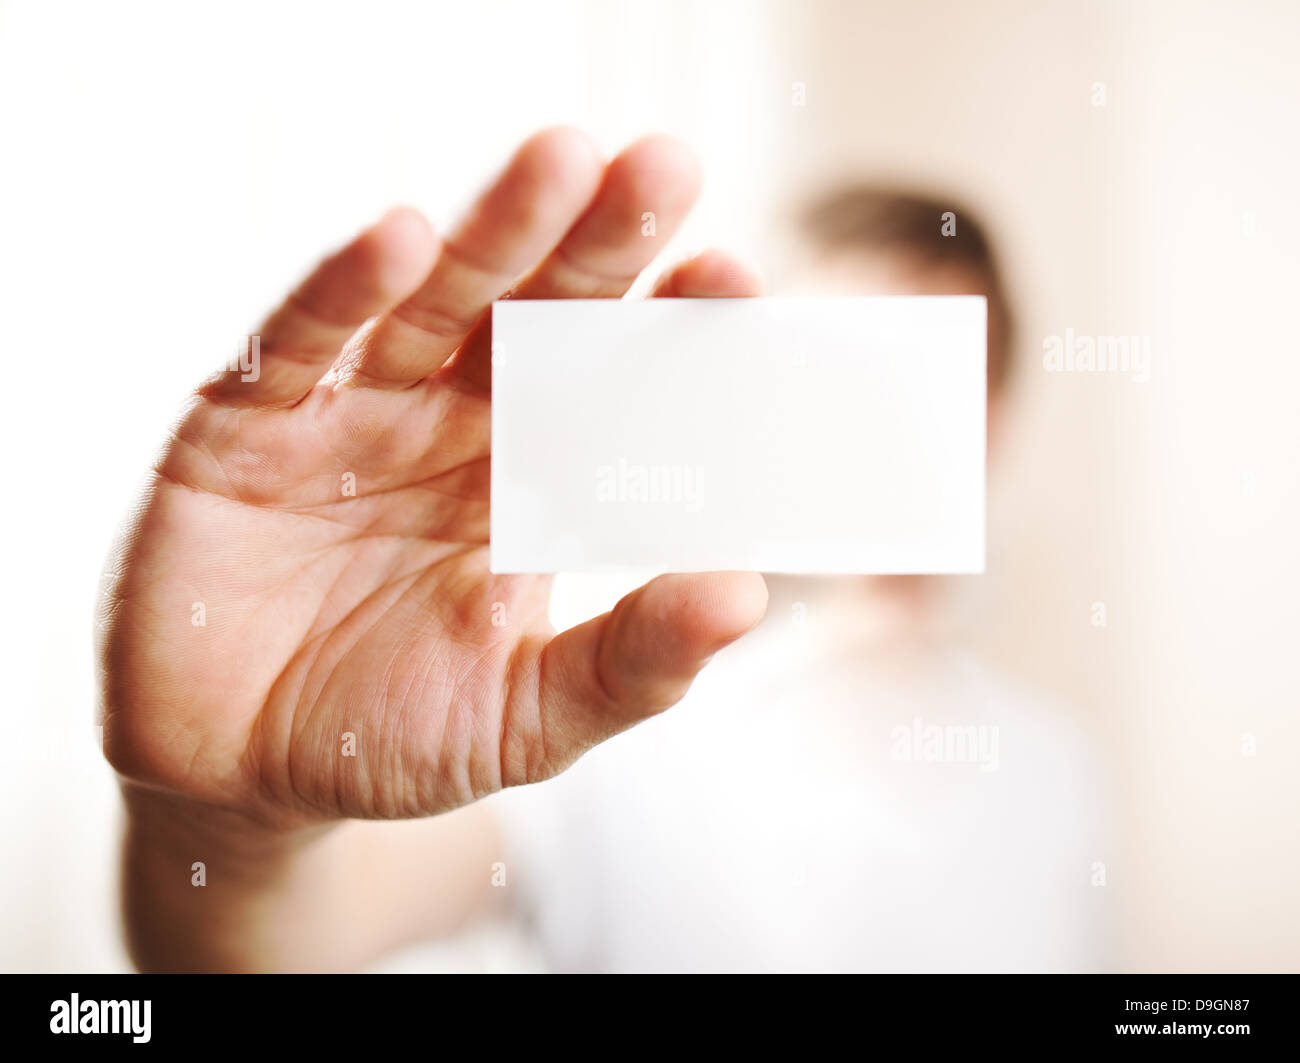 Human hand holding blank business card with copy space, petite dof Banque D'Images